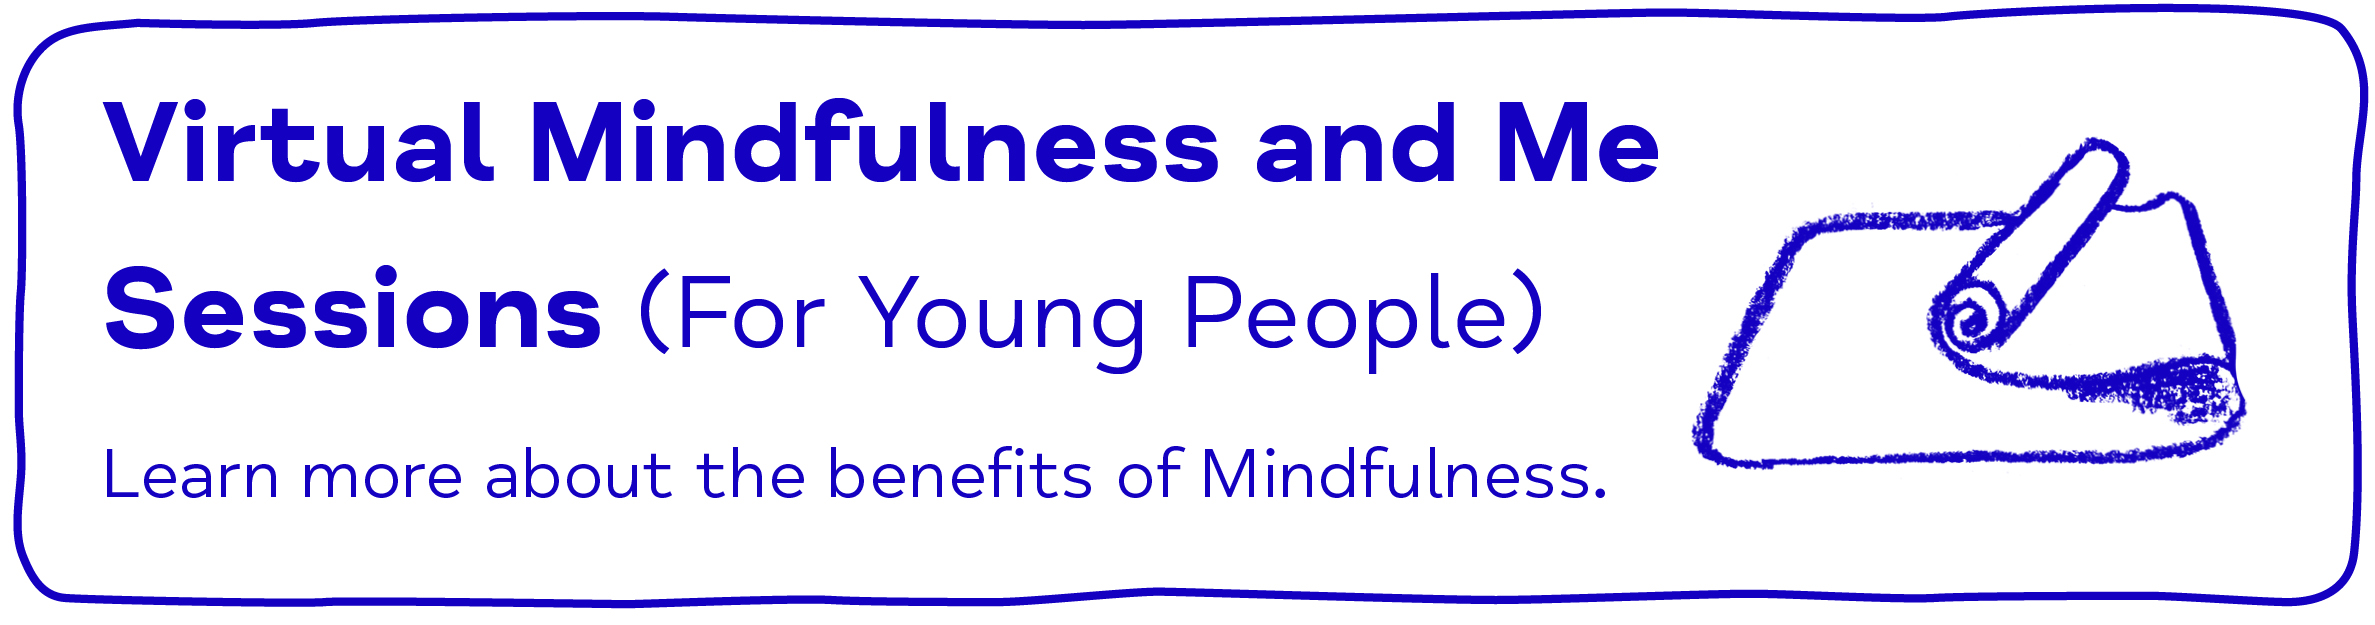 Virtual Mindfulness and Me Sessions (For Young People). Learn more about the benefits of Mindfulness.